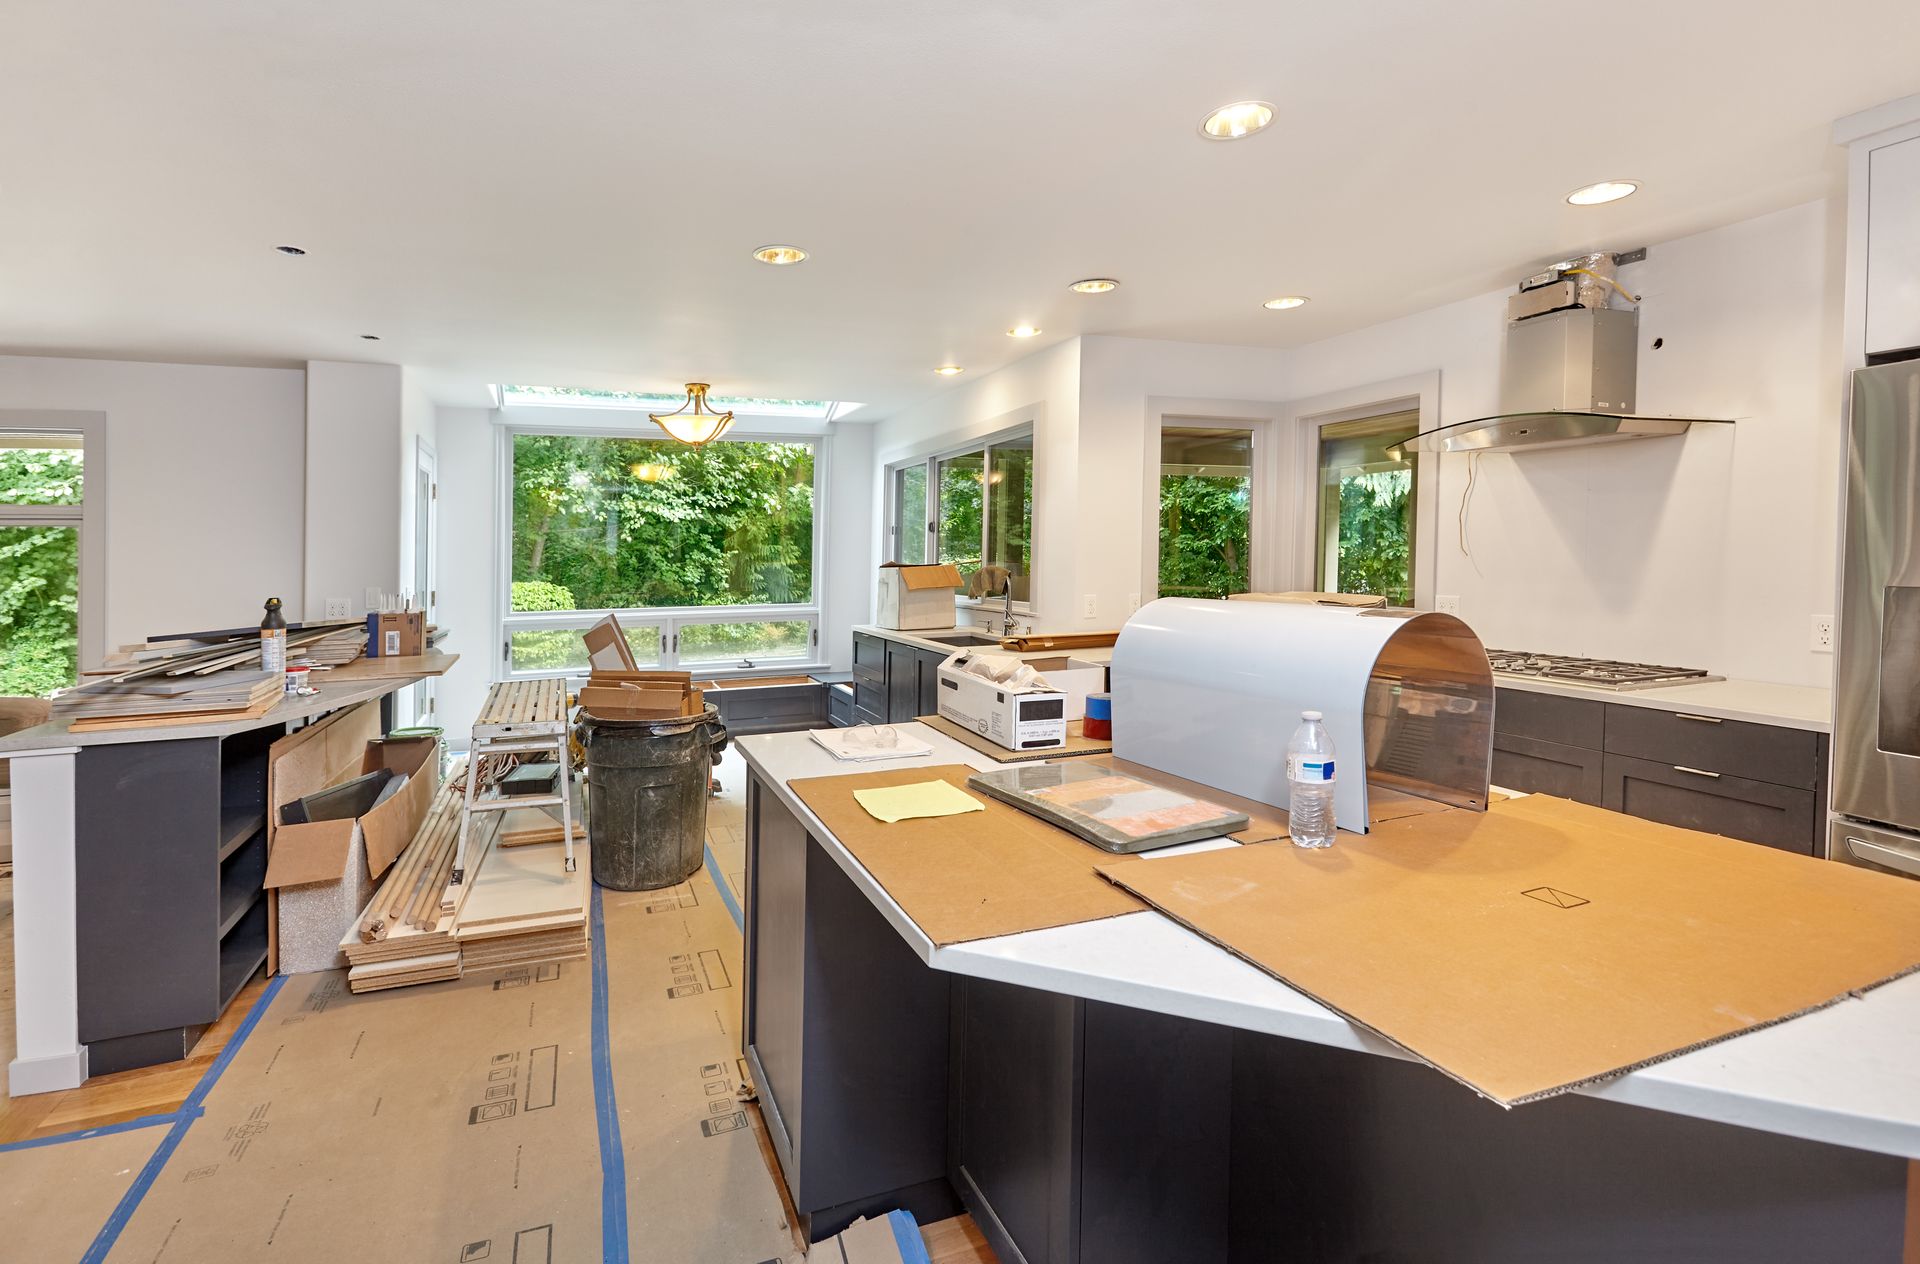 A freshly remodeled kitchen that needs some construction cleanup done.